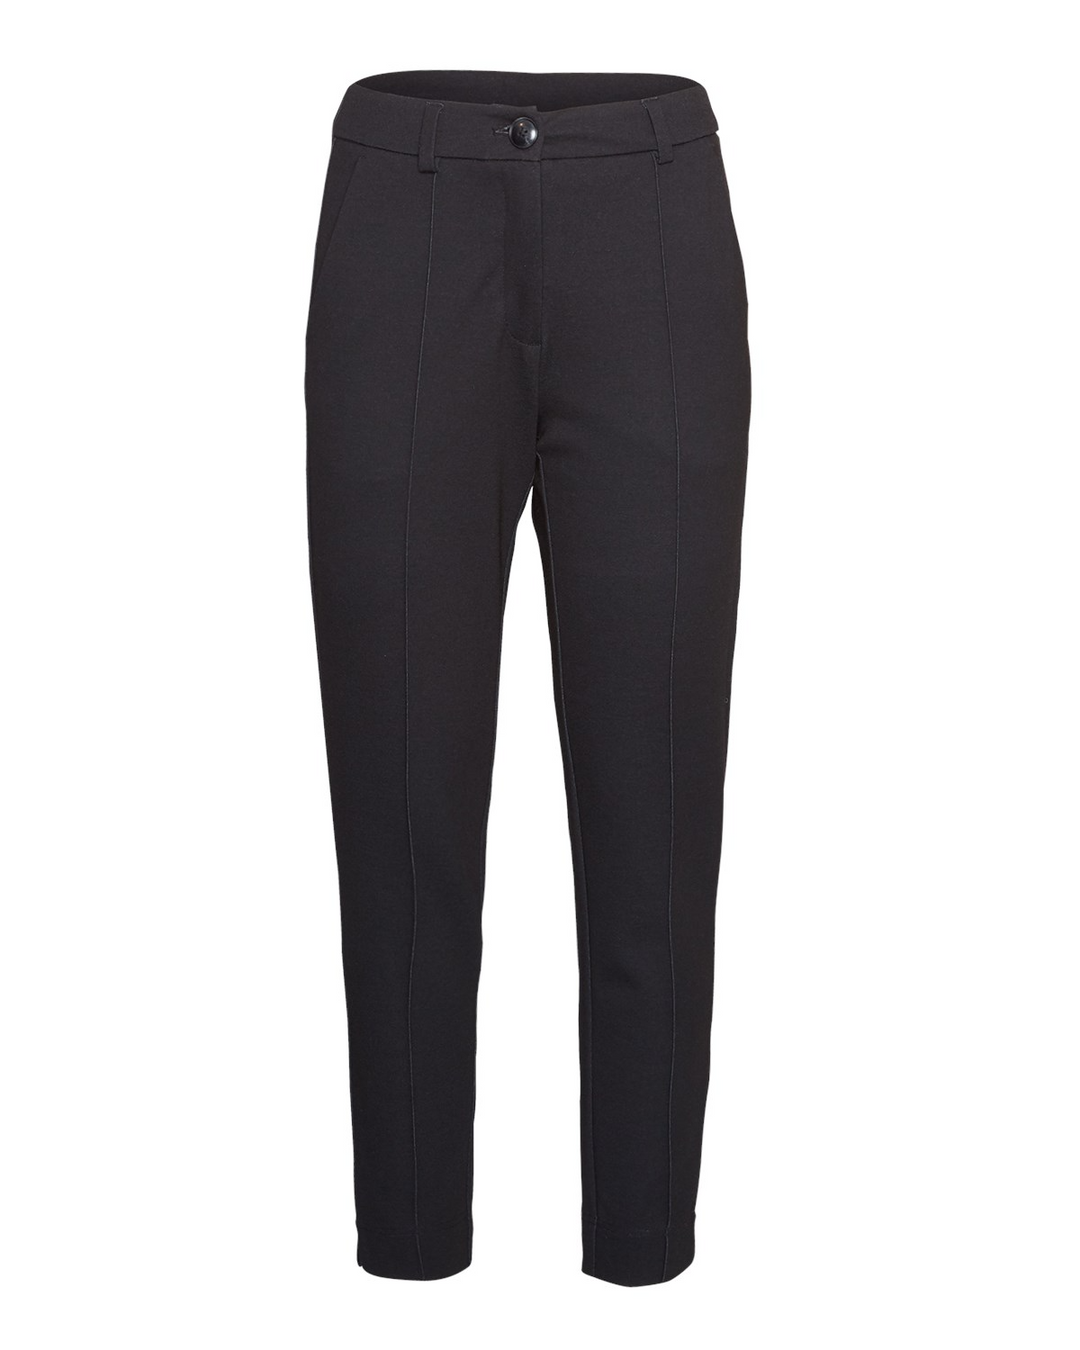 Bericia Ankle Pants